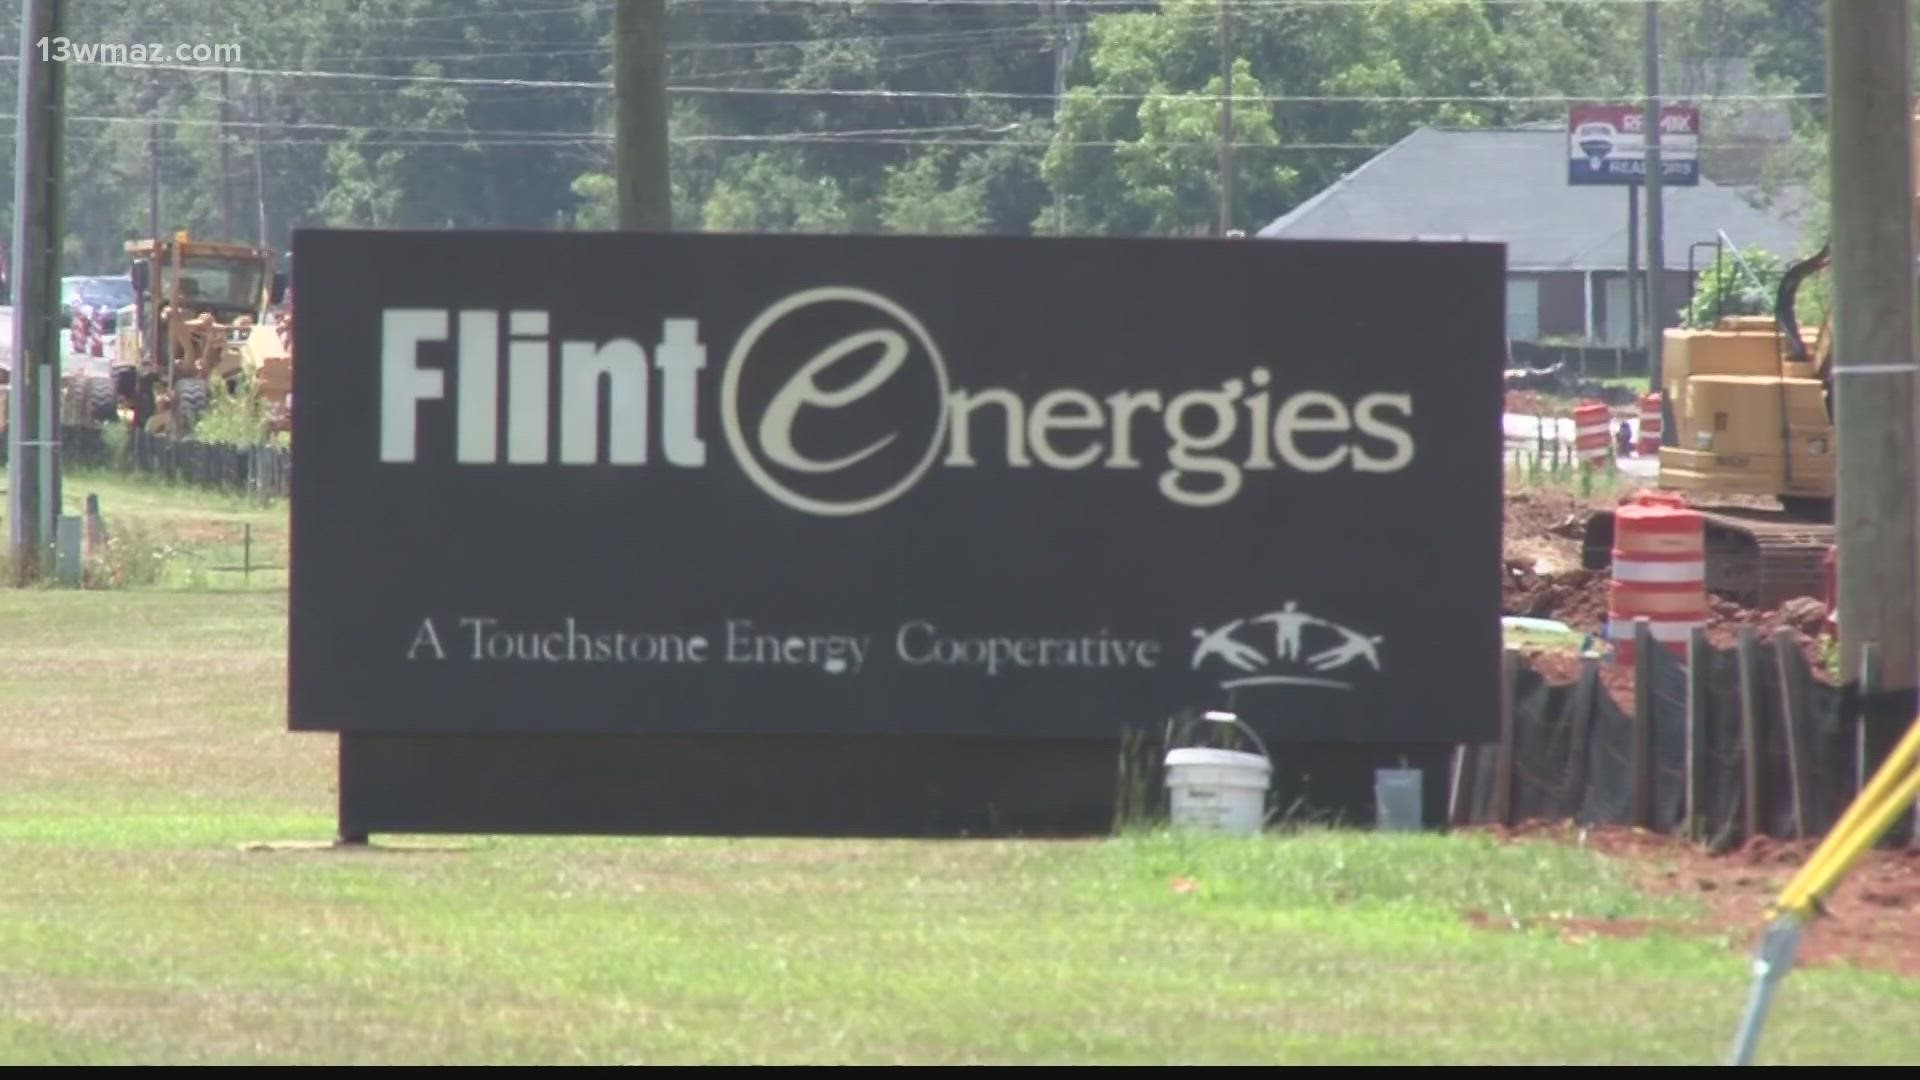 According to a release from the company, on April 1, Flint Energies’ residential base charge will move from $32 per month to $34 per month.